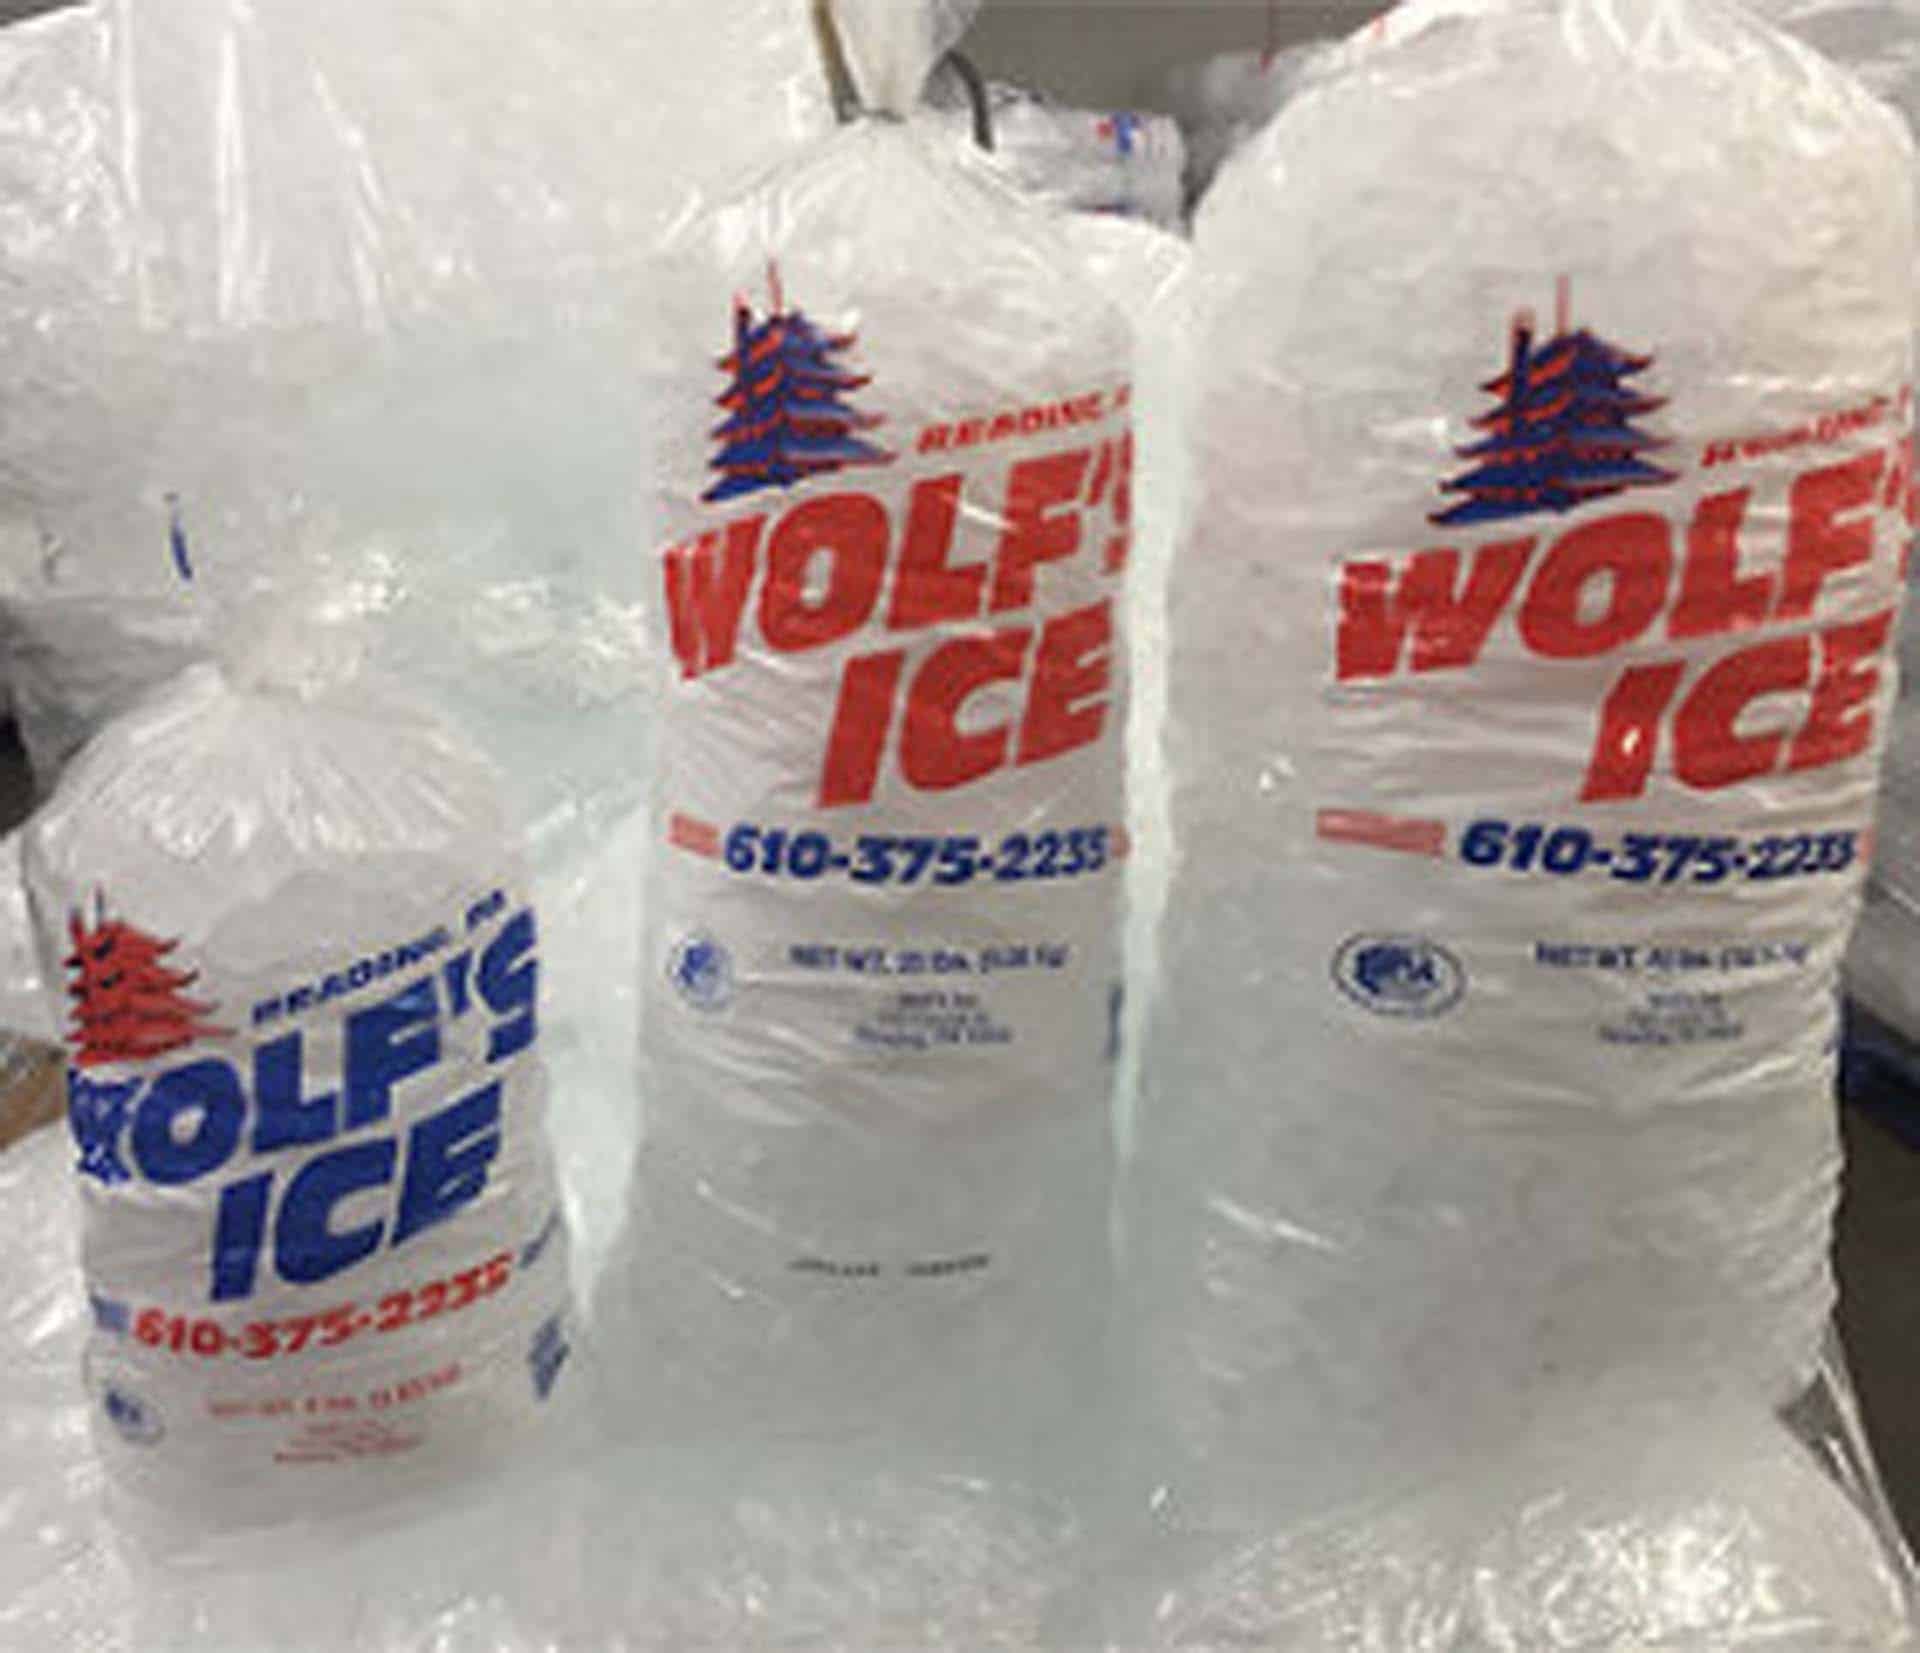 wolf's ice bags